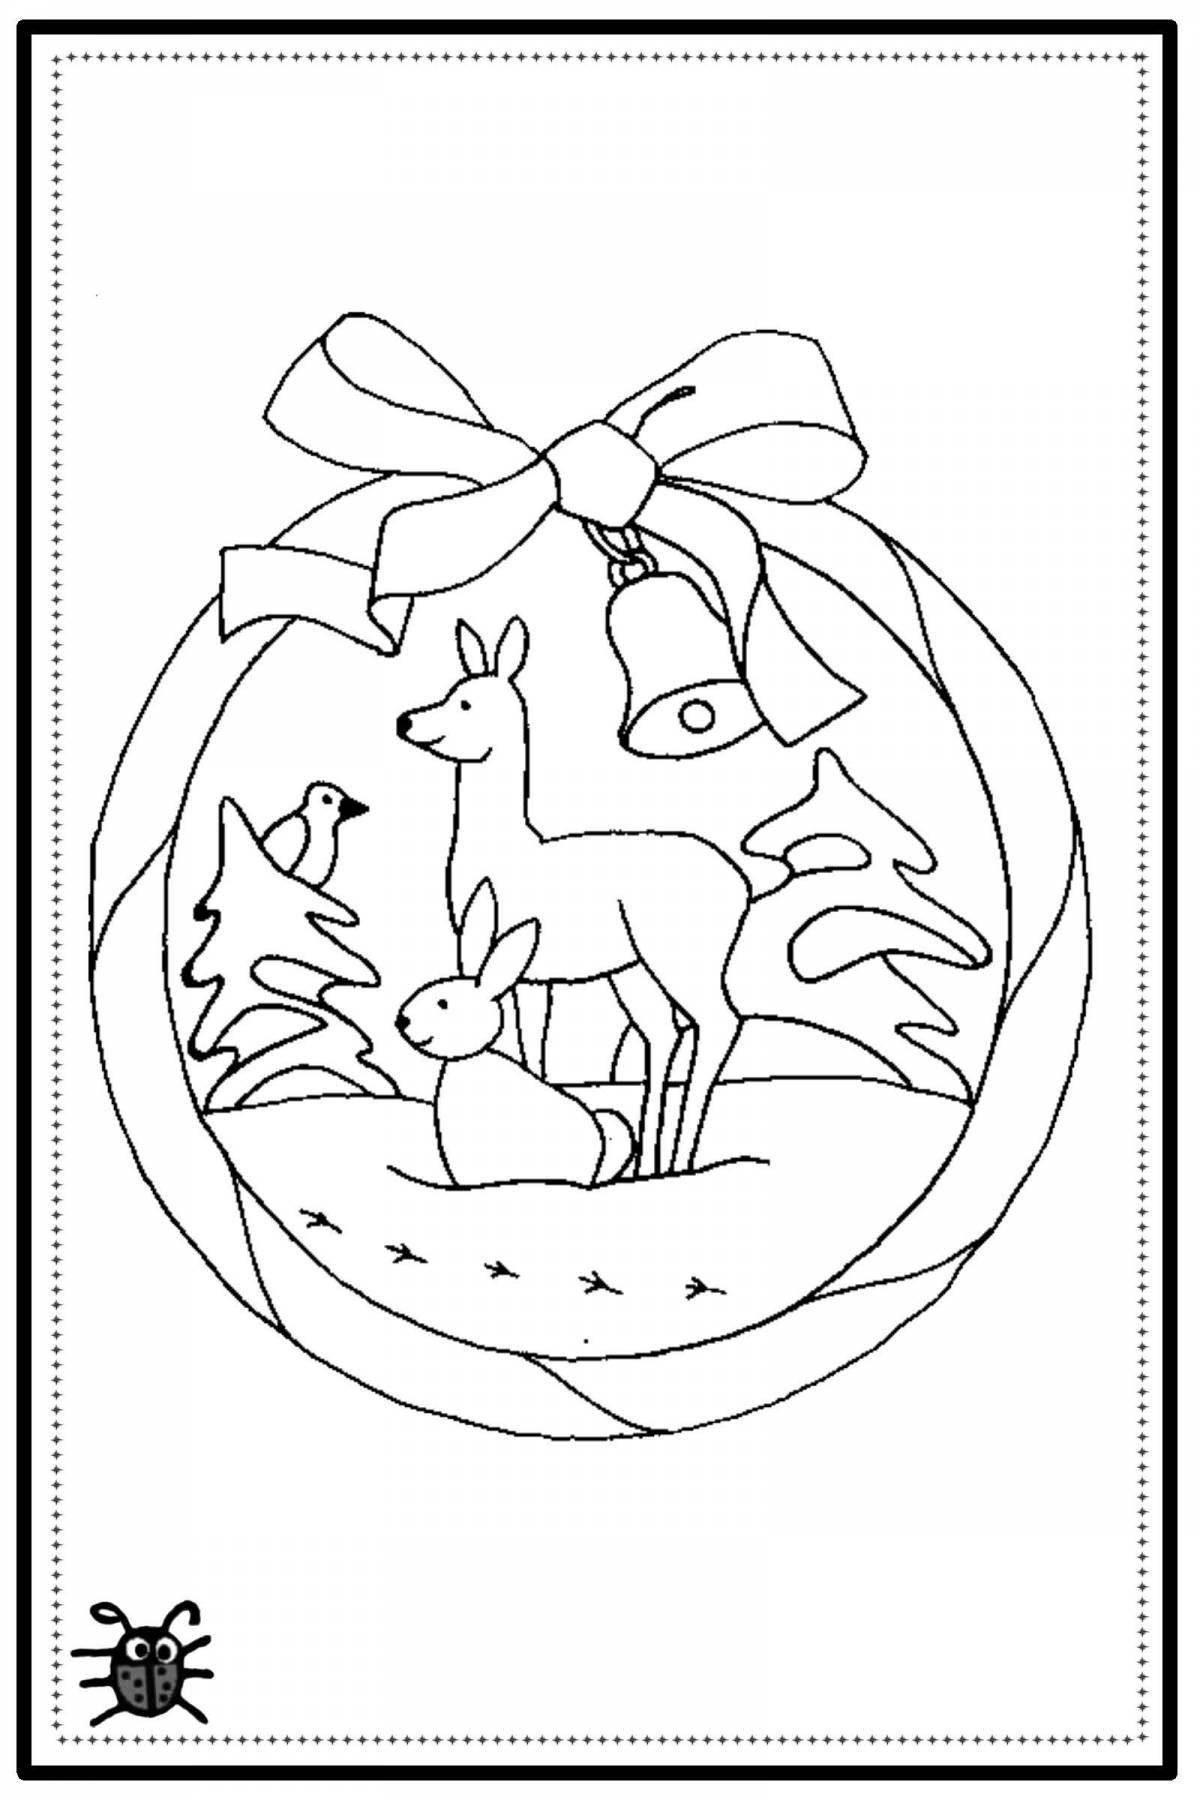 Gorgeous Christmas coloring pictures for kids